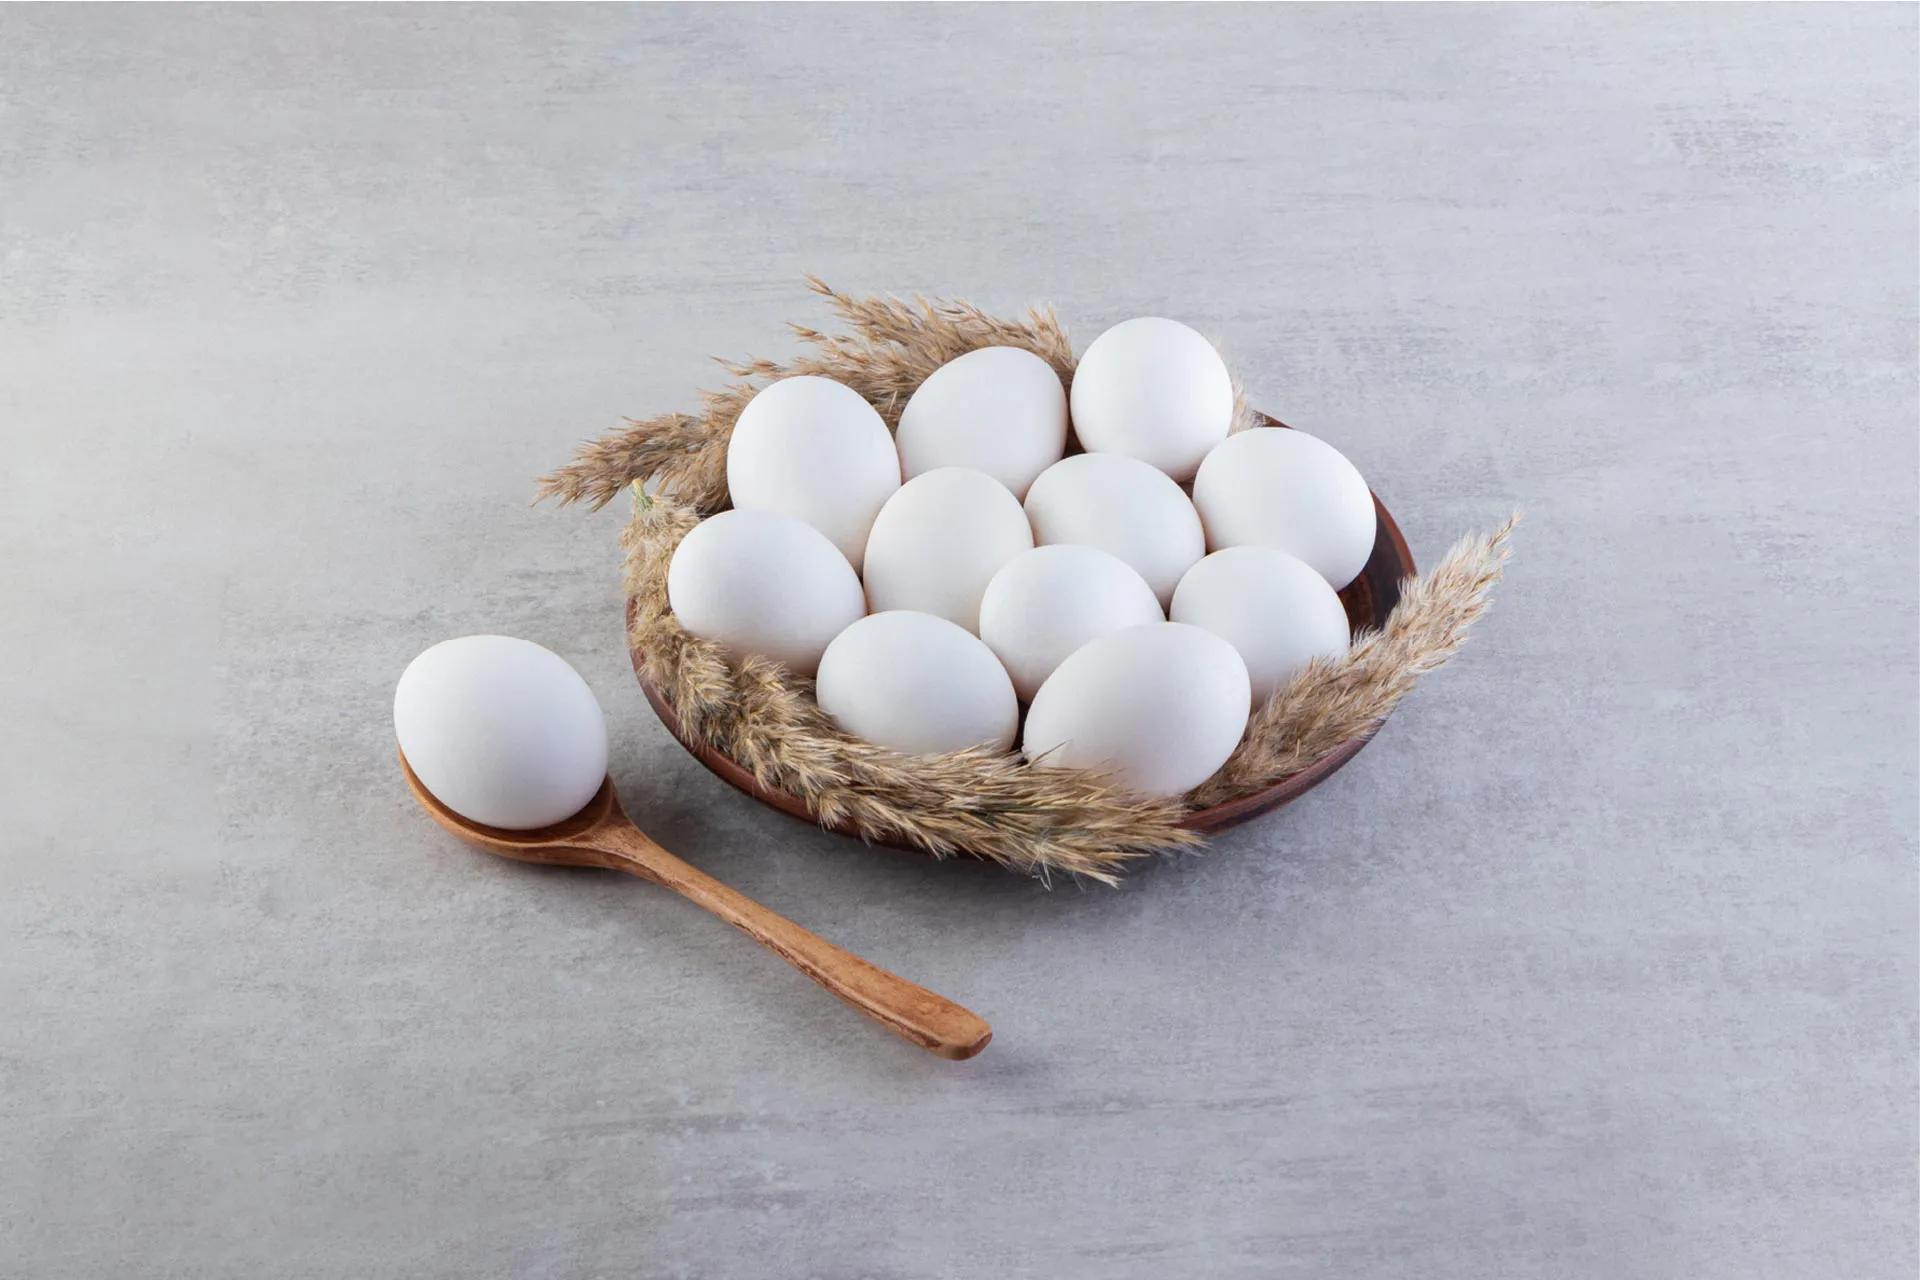 World Egg Day: What are the Healthiest Ways to Cook Eggs?